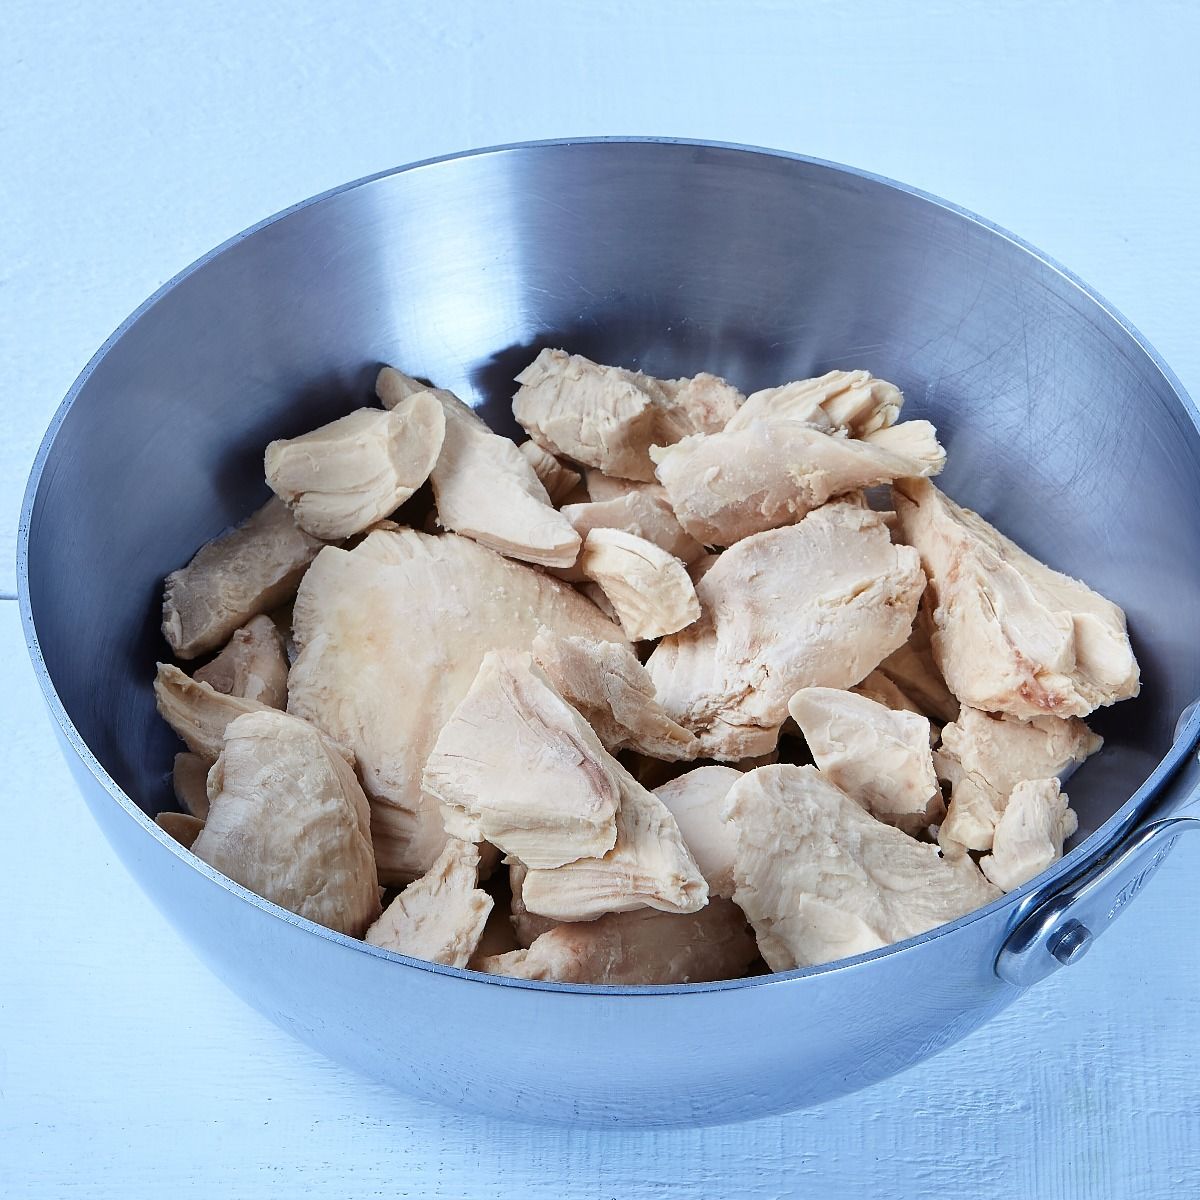 Cooked chicken pieces, 100% white meat, halal